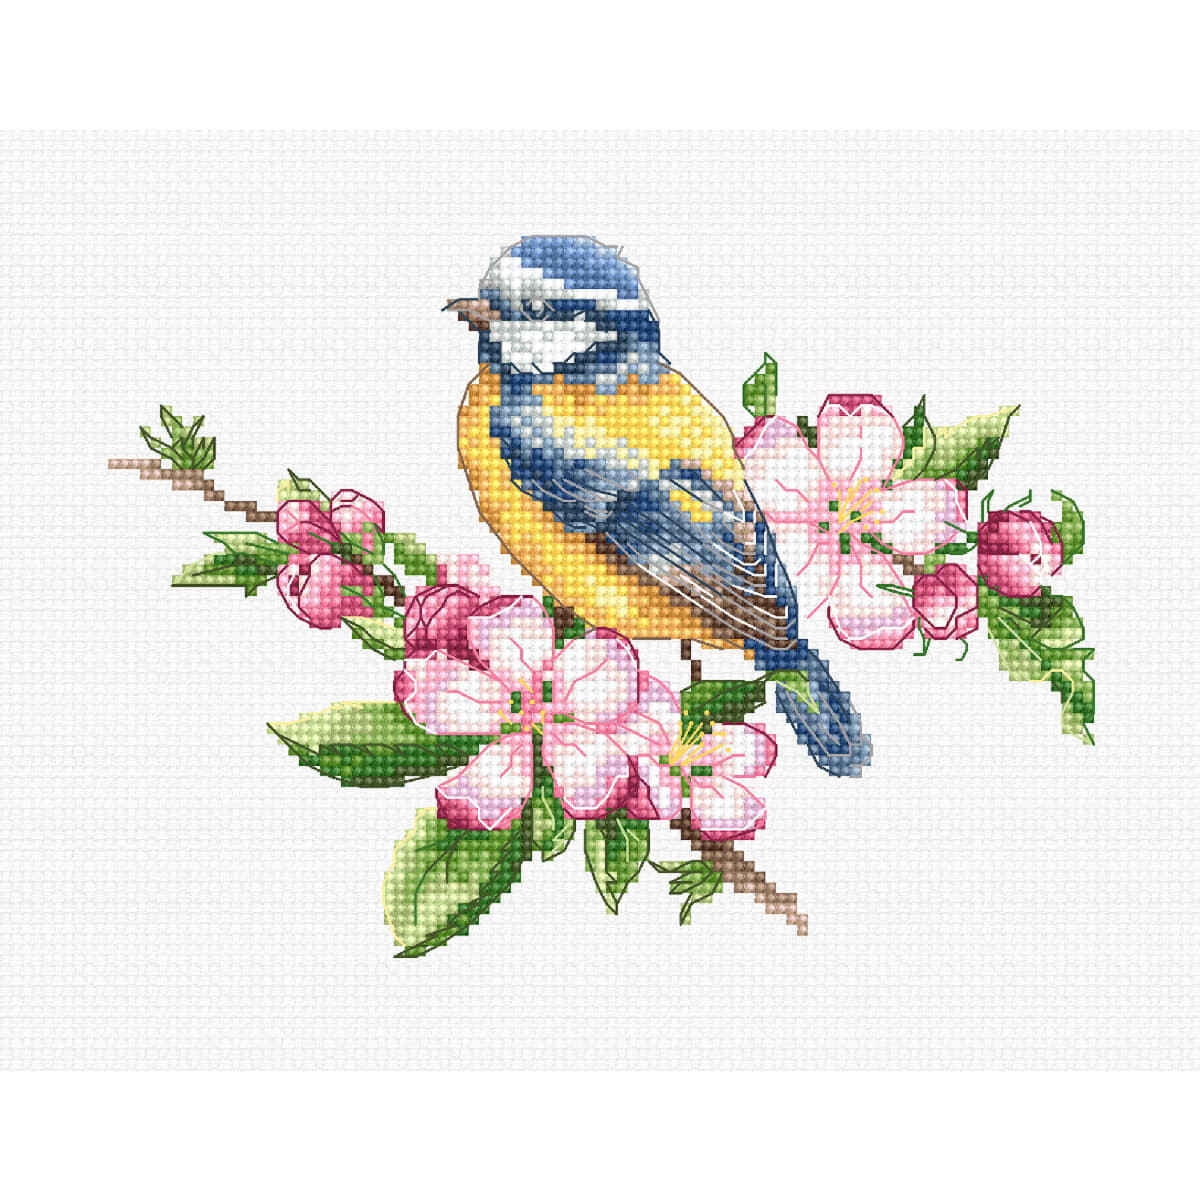 This embroidery kit from Luca-s features a cross stitch...